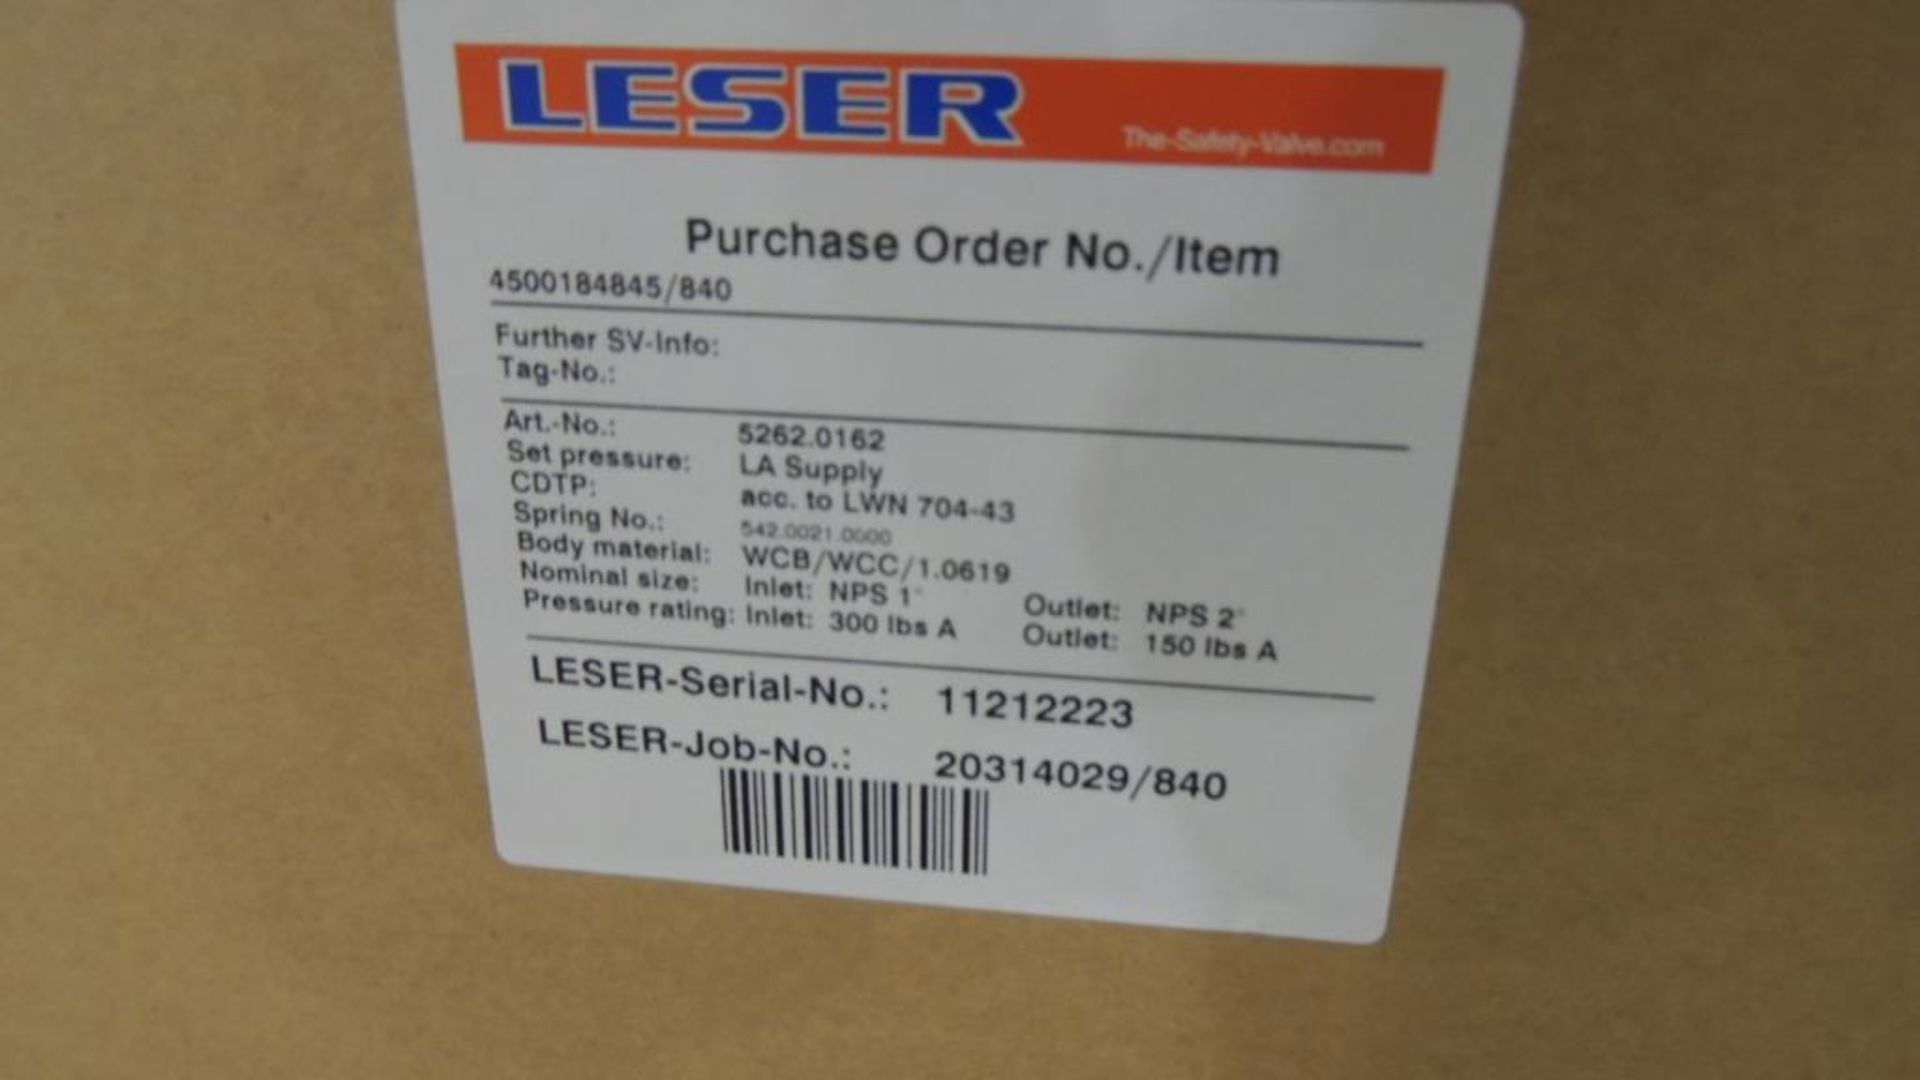 Large Quantity of Leser Relief and Safety Valves, plus Spare Parts Kits - Image 108 of 374